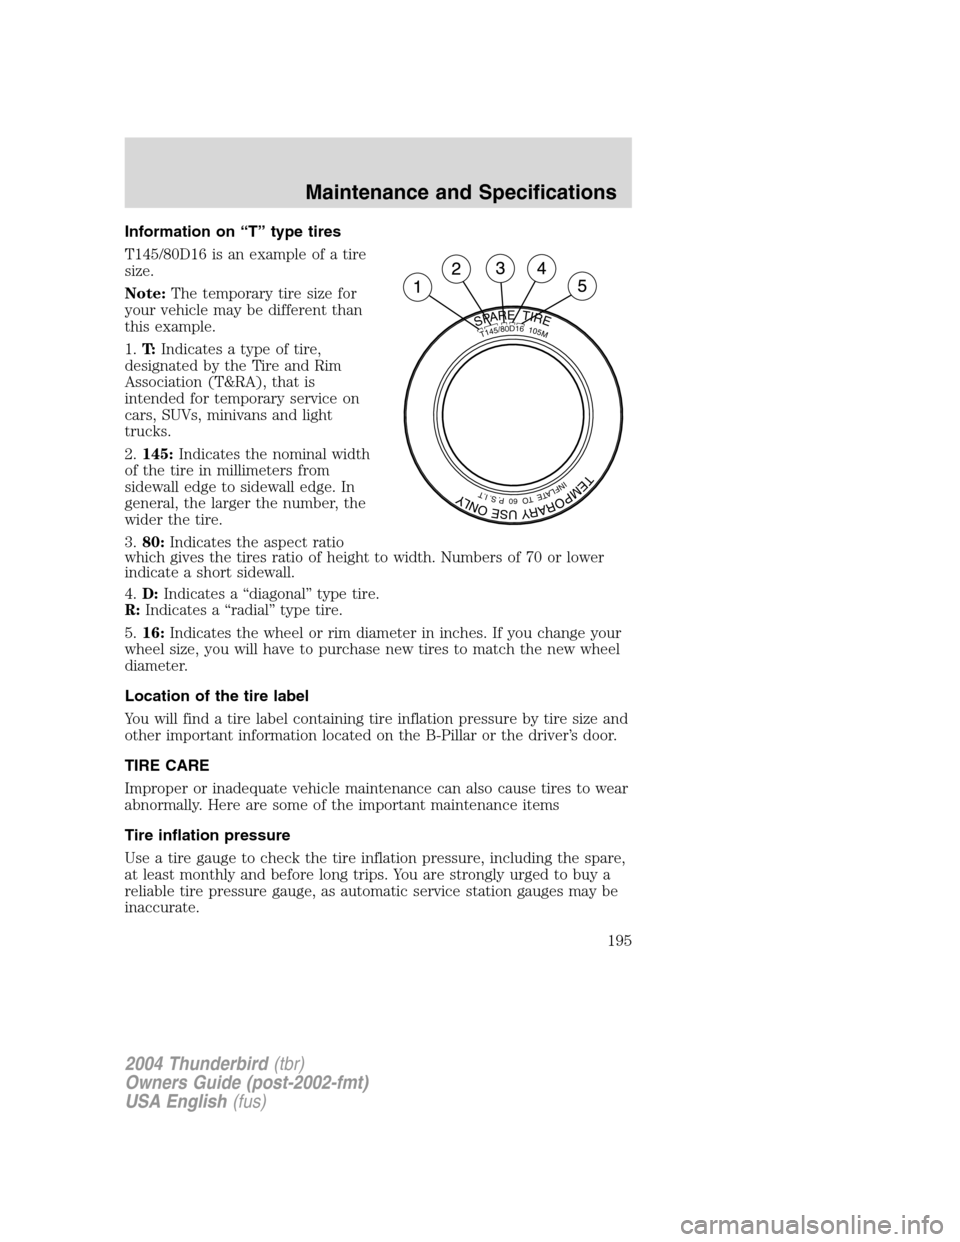 FORD THUNDERBIRD 2004 11.G Owners Manual Information on“T ” type tires
T145/80D16 is an example of a tire
size.
Note: The temporary tire size for
your vehicle may be different than
this example.
1. T: Indicates a type of tire,
designated